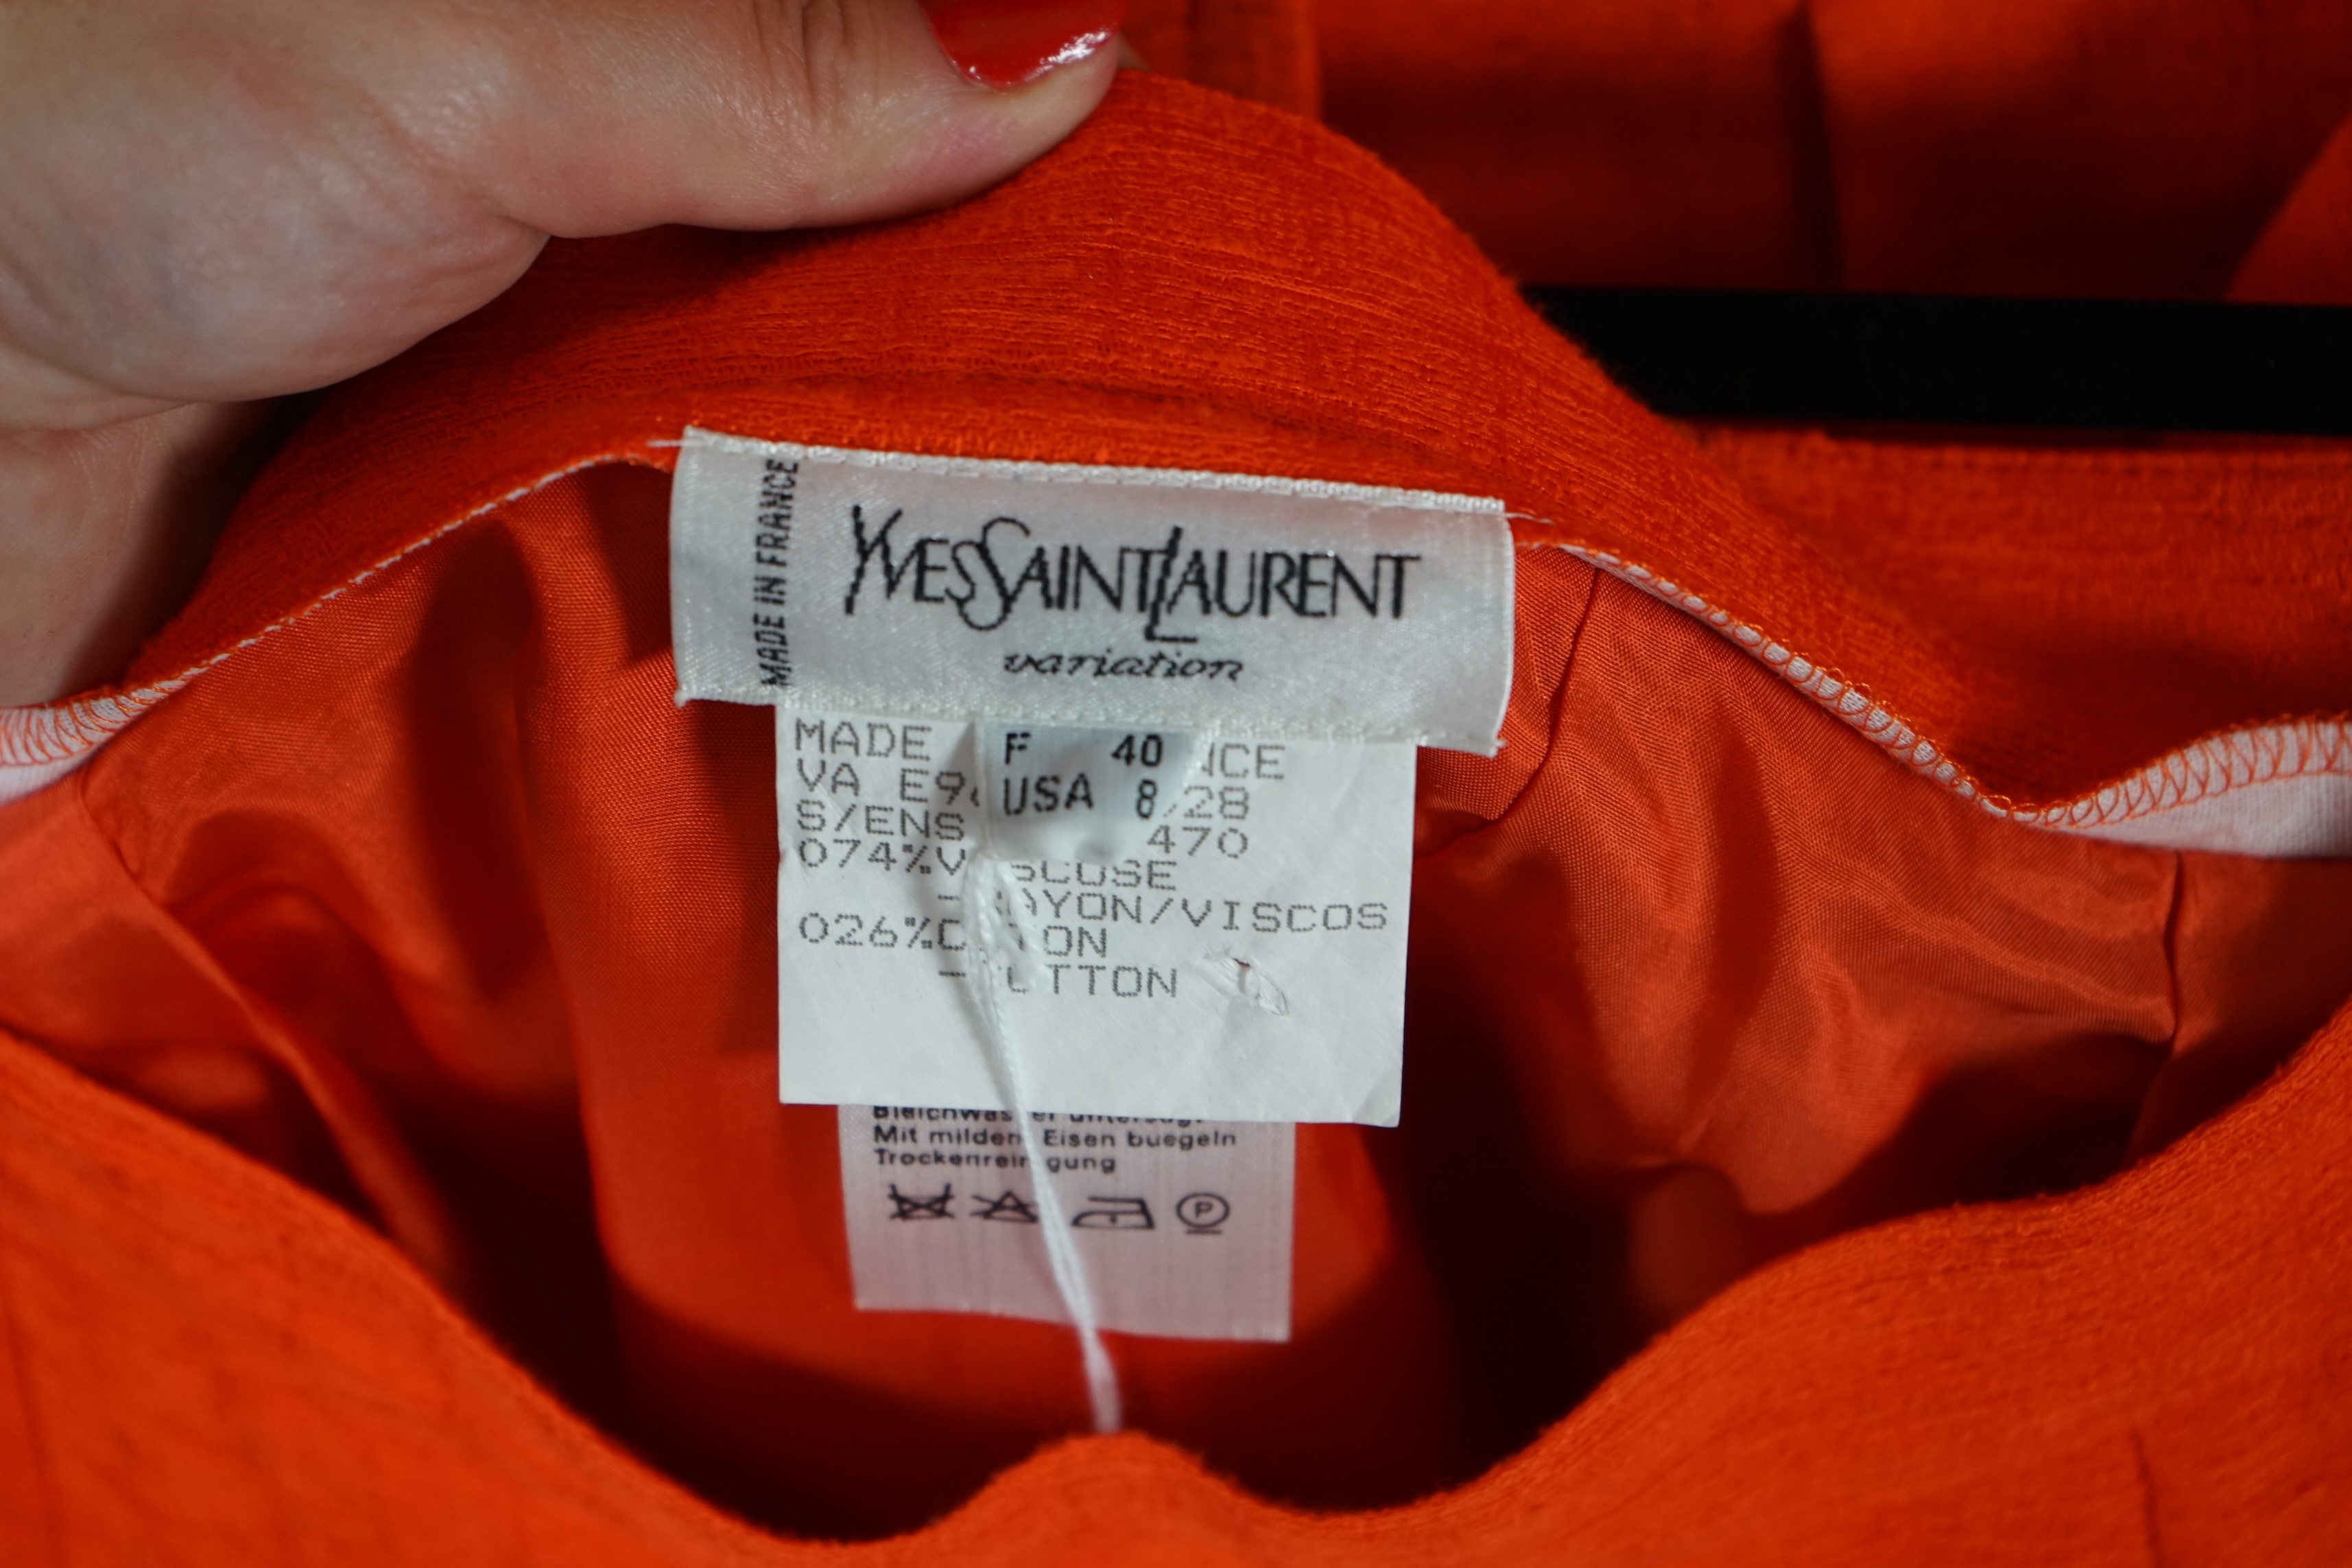 Two vintage Yves Saint Laurent variation lady's skirt suits, royal blue and orange. F 40 (UK 12).Please note alterations to make the waist smaller may have been carried out on some of the skirts. Proceeds to Happy Paws P